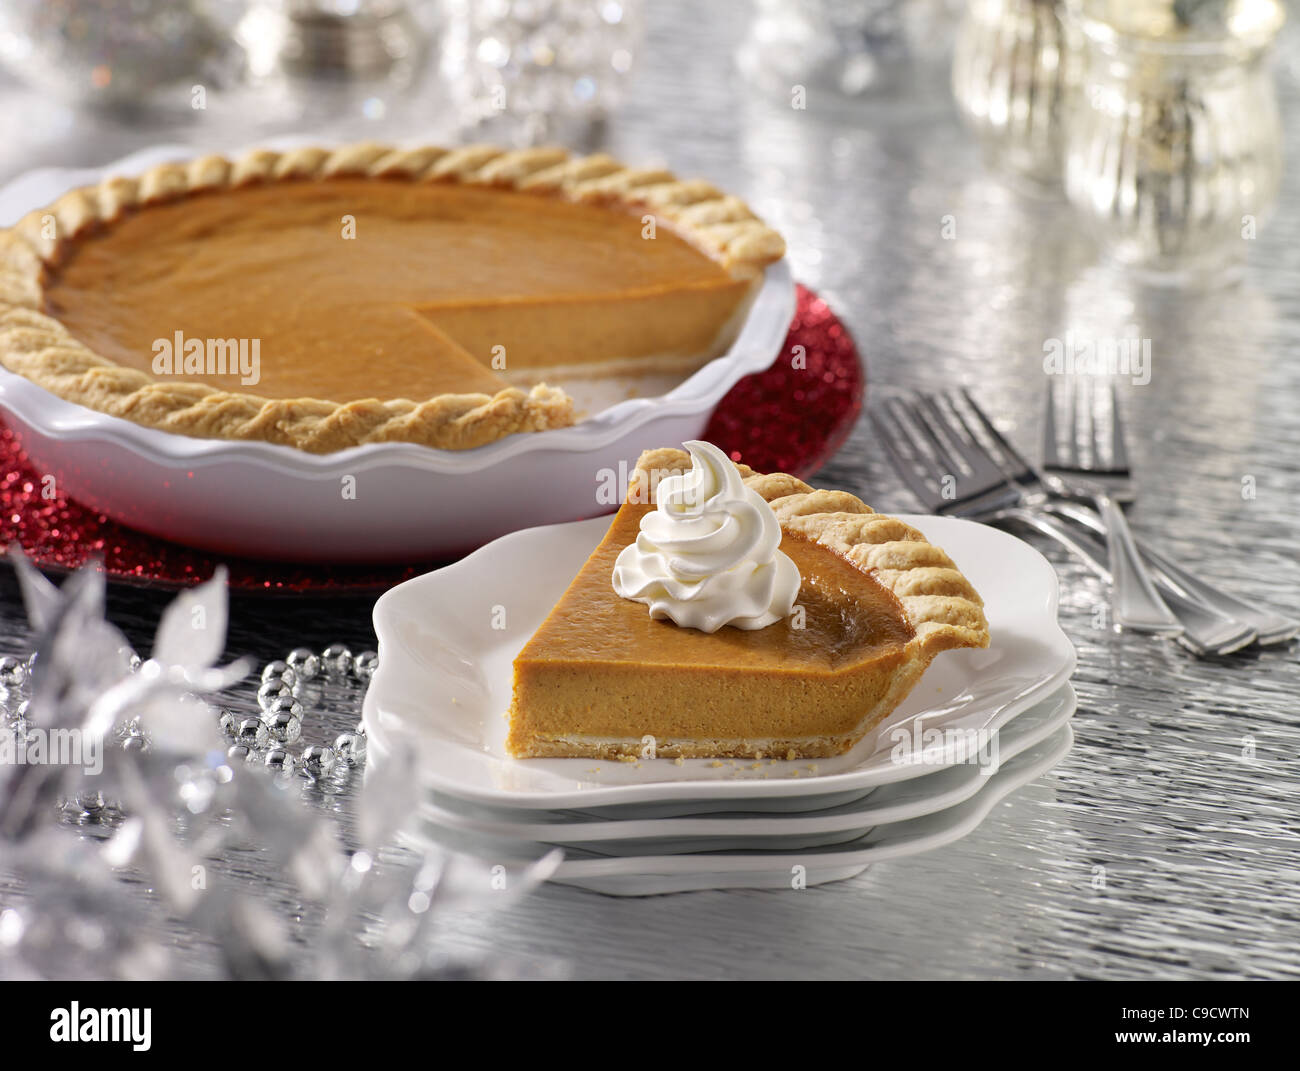 A pumpkin pie slice with a whole pie in the background in a holiday setting Stock Photo